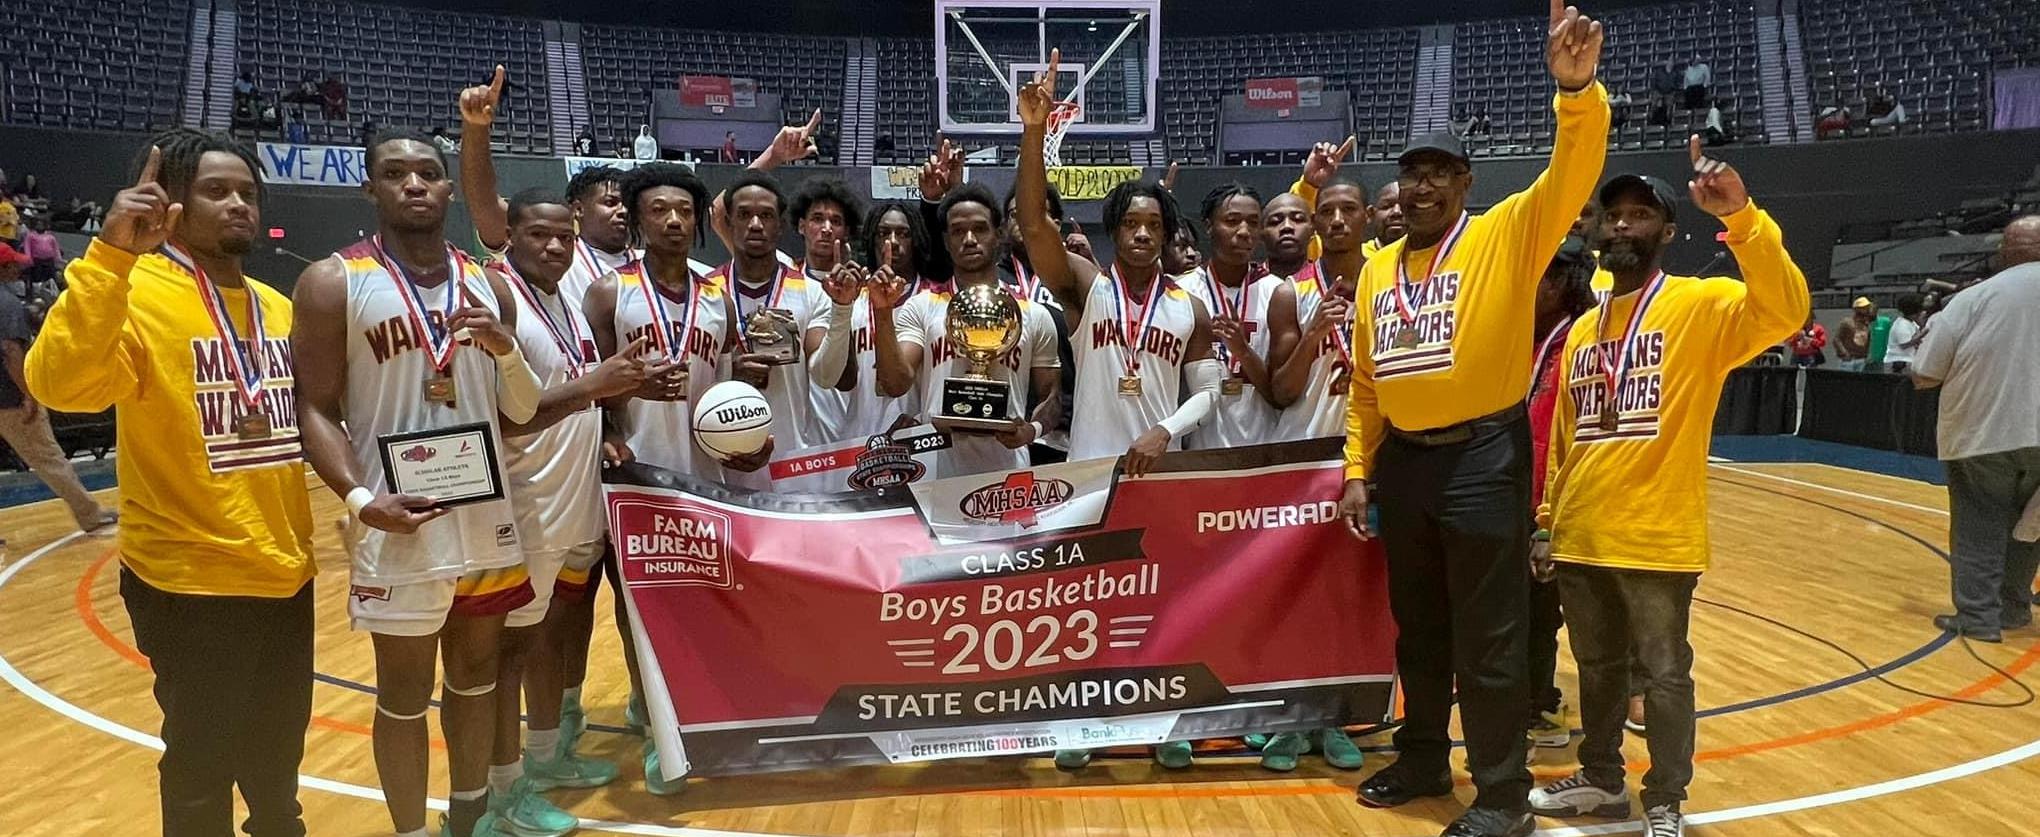 Boys Basketball Shaw High McEvans Warriors 1A State Champions